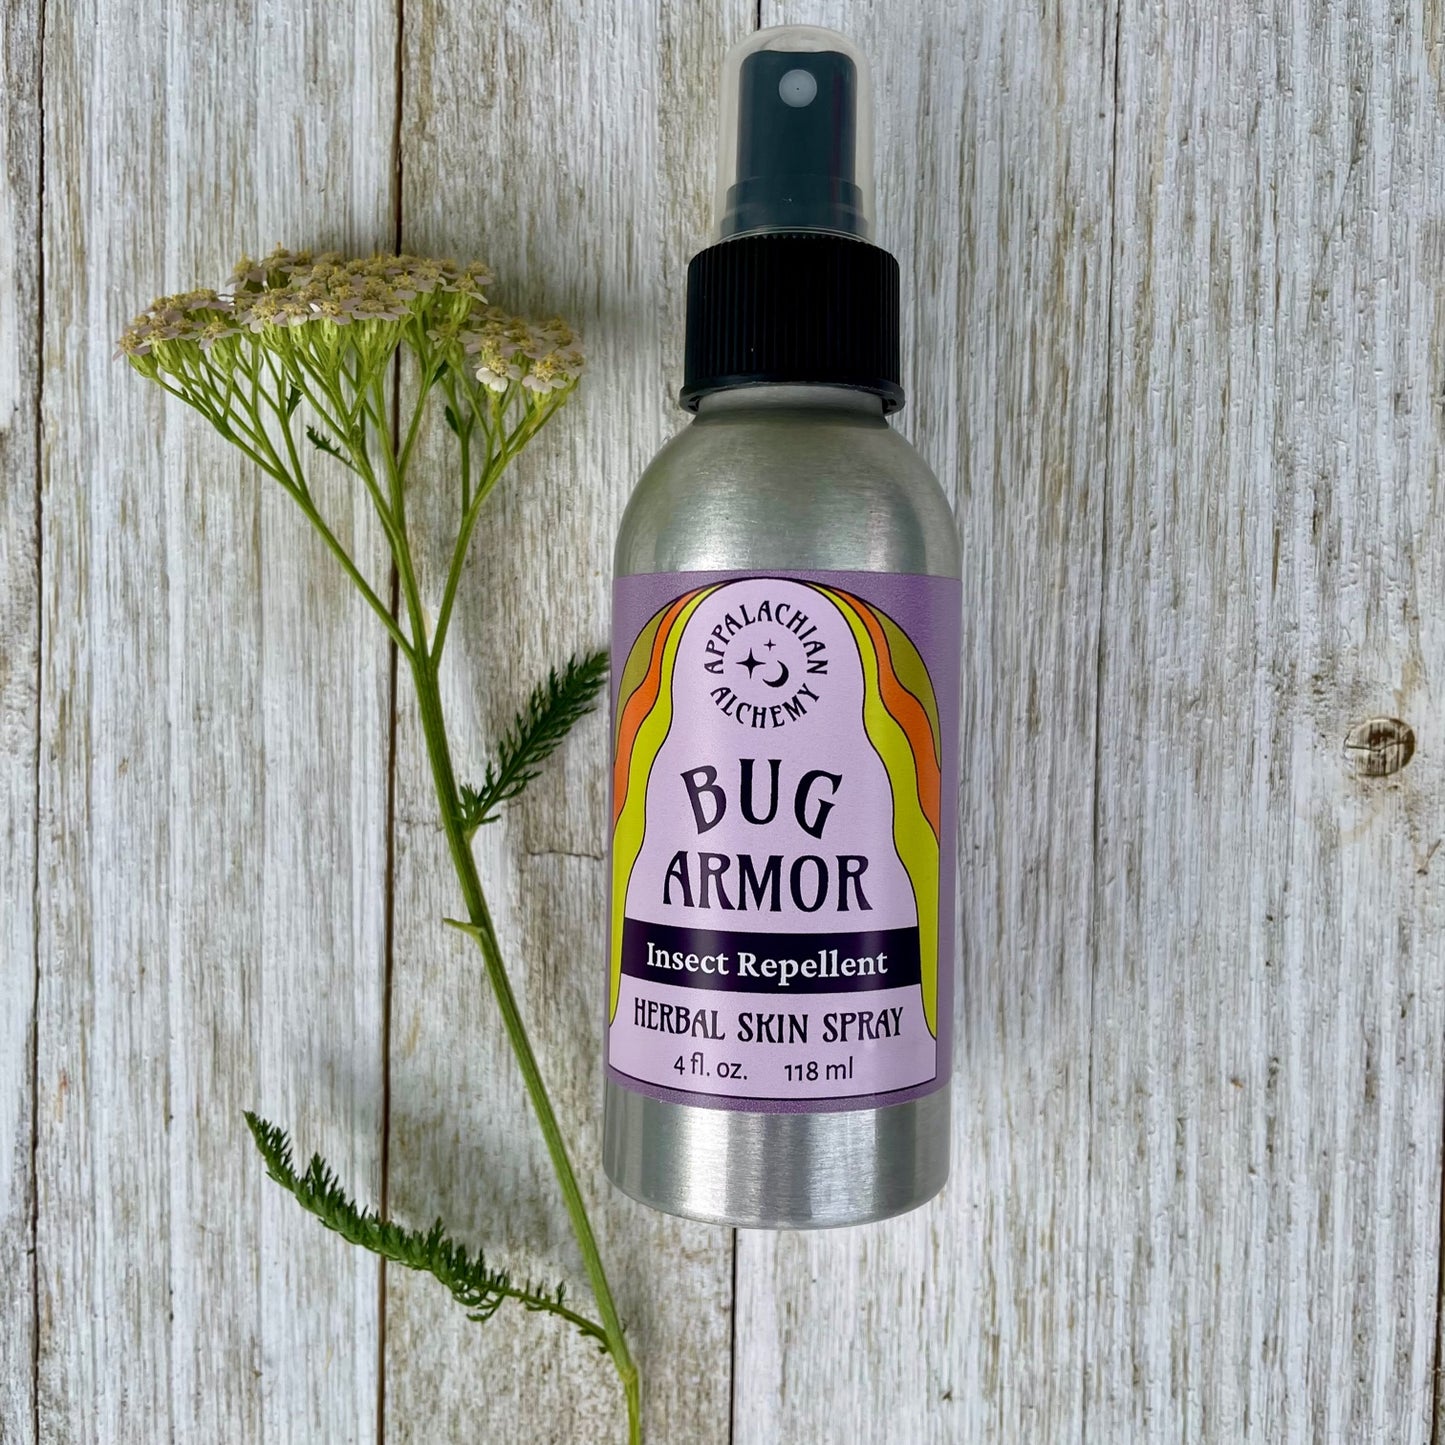 Bug Armor Natural Insect Repellent